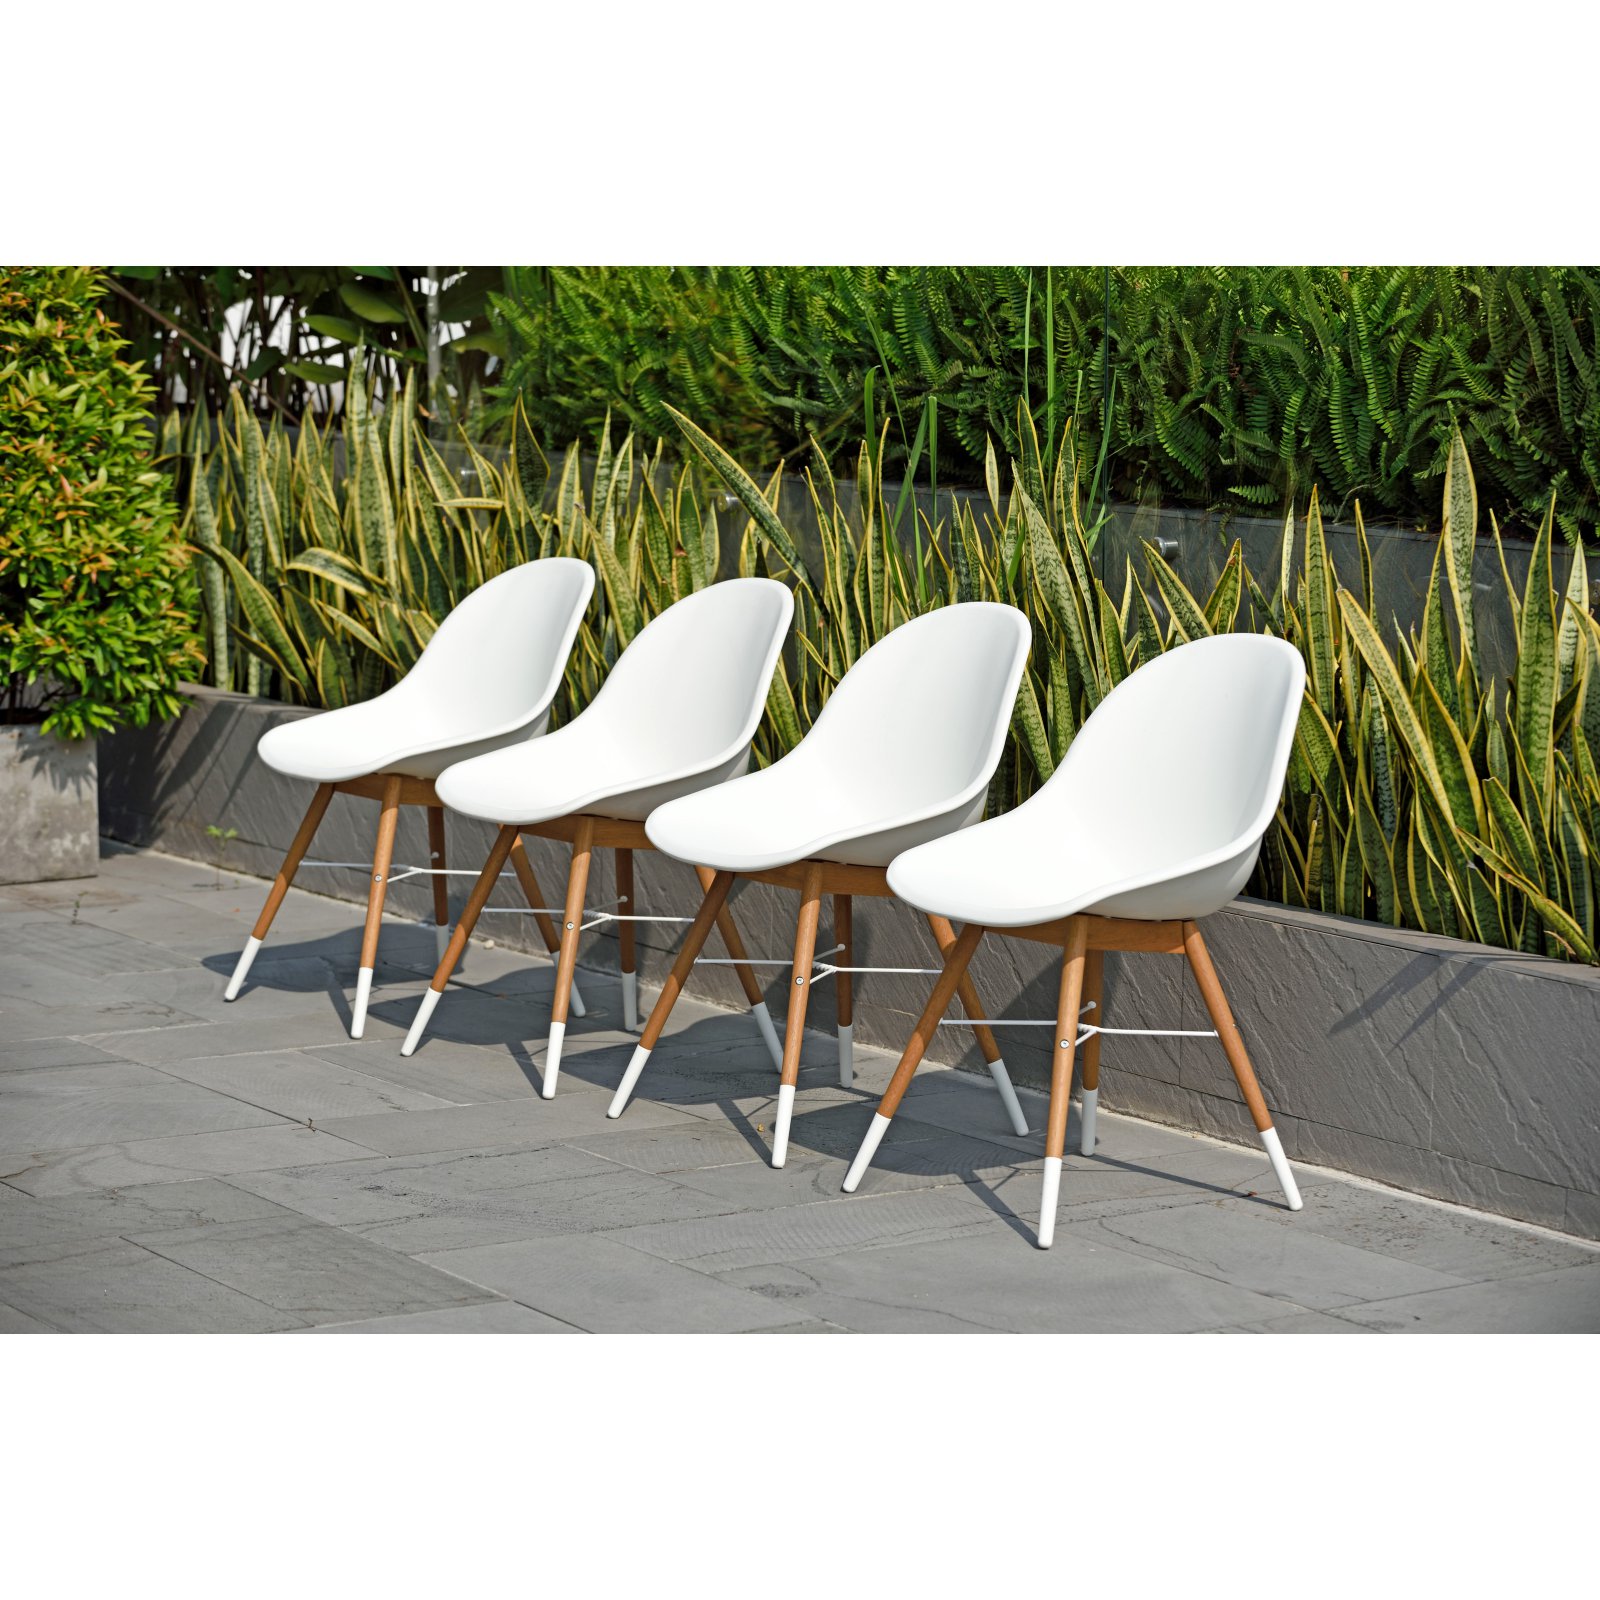 Amazonia Valli Wood Patio Dining Chair without Arms - Set of 4 - image 4 of 5